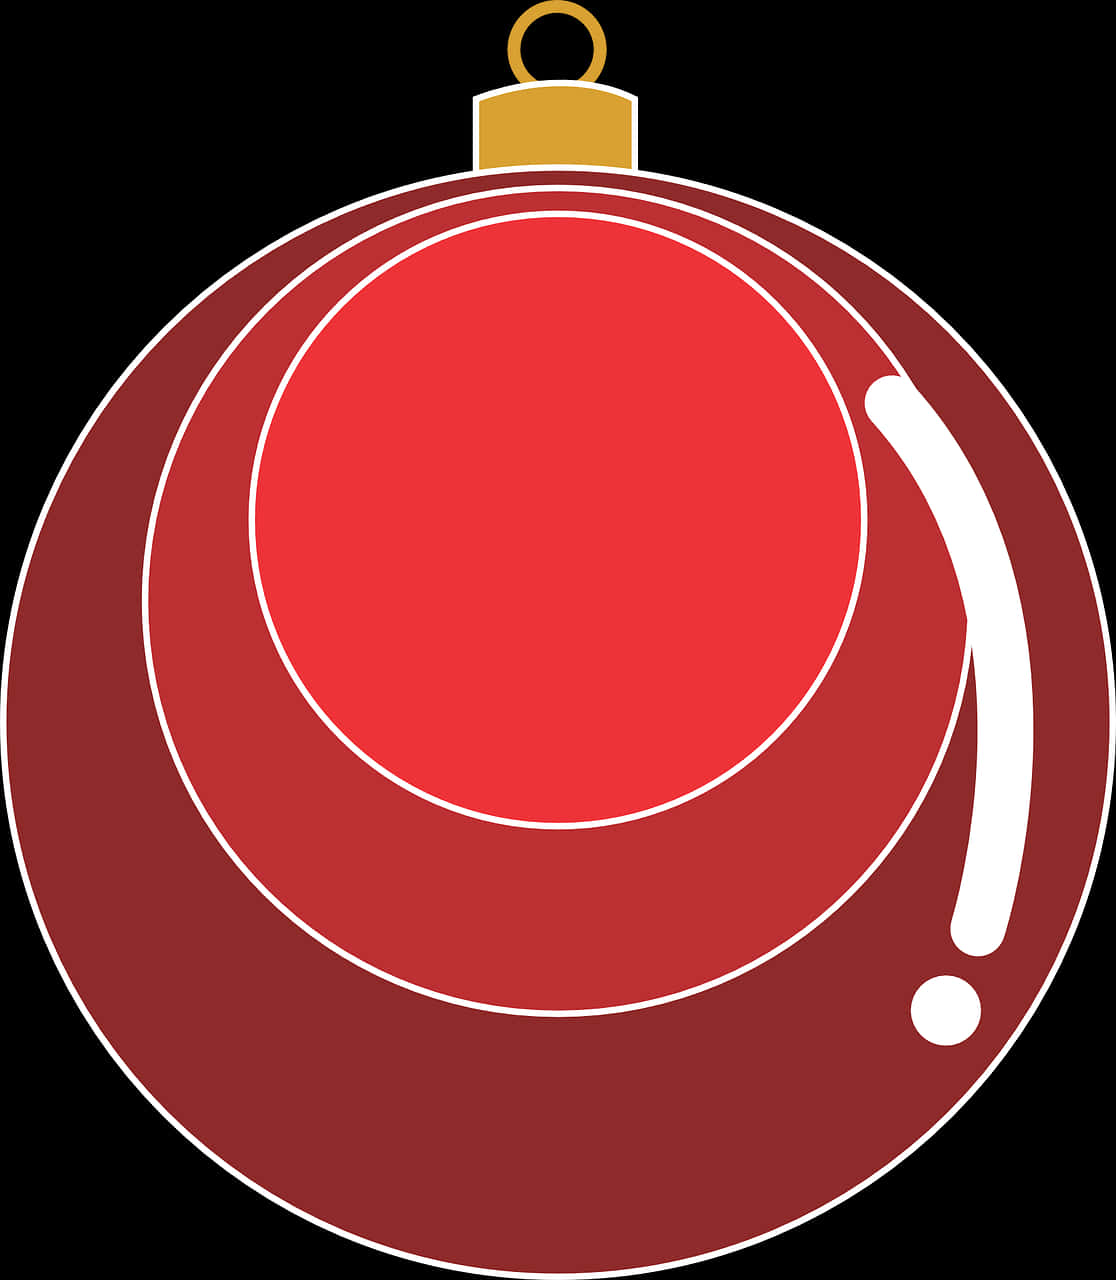 Red Christmas Ornament Vector PNG